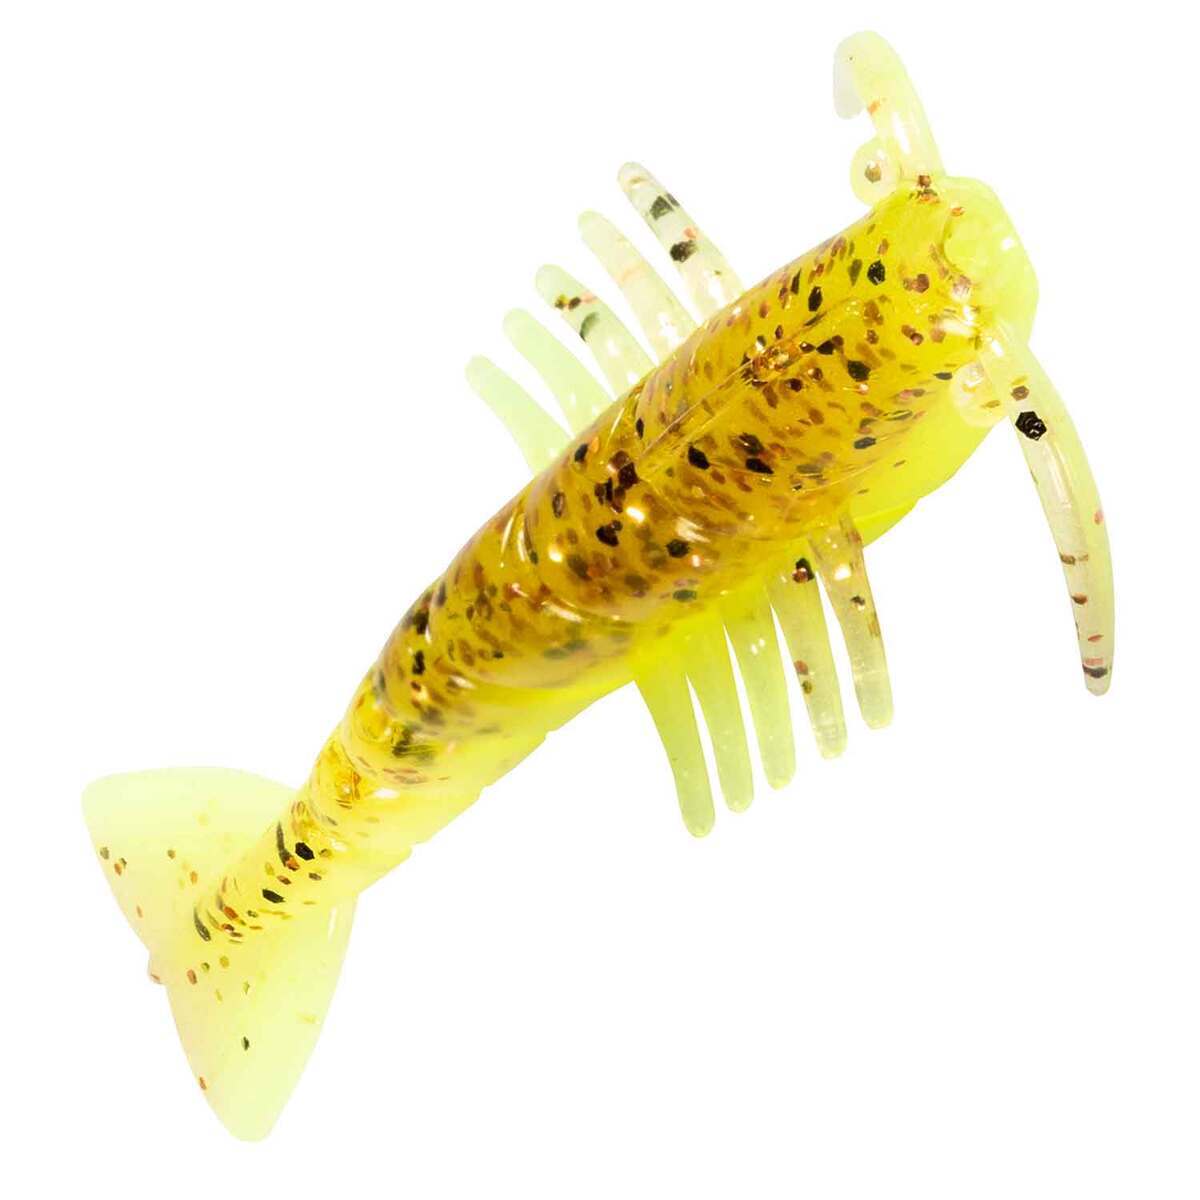 Z-Man Salty Ned ShrimpZ Ned Rig Bait - Sexy Penny, 2-1/2in, 6 Pack